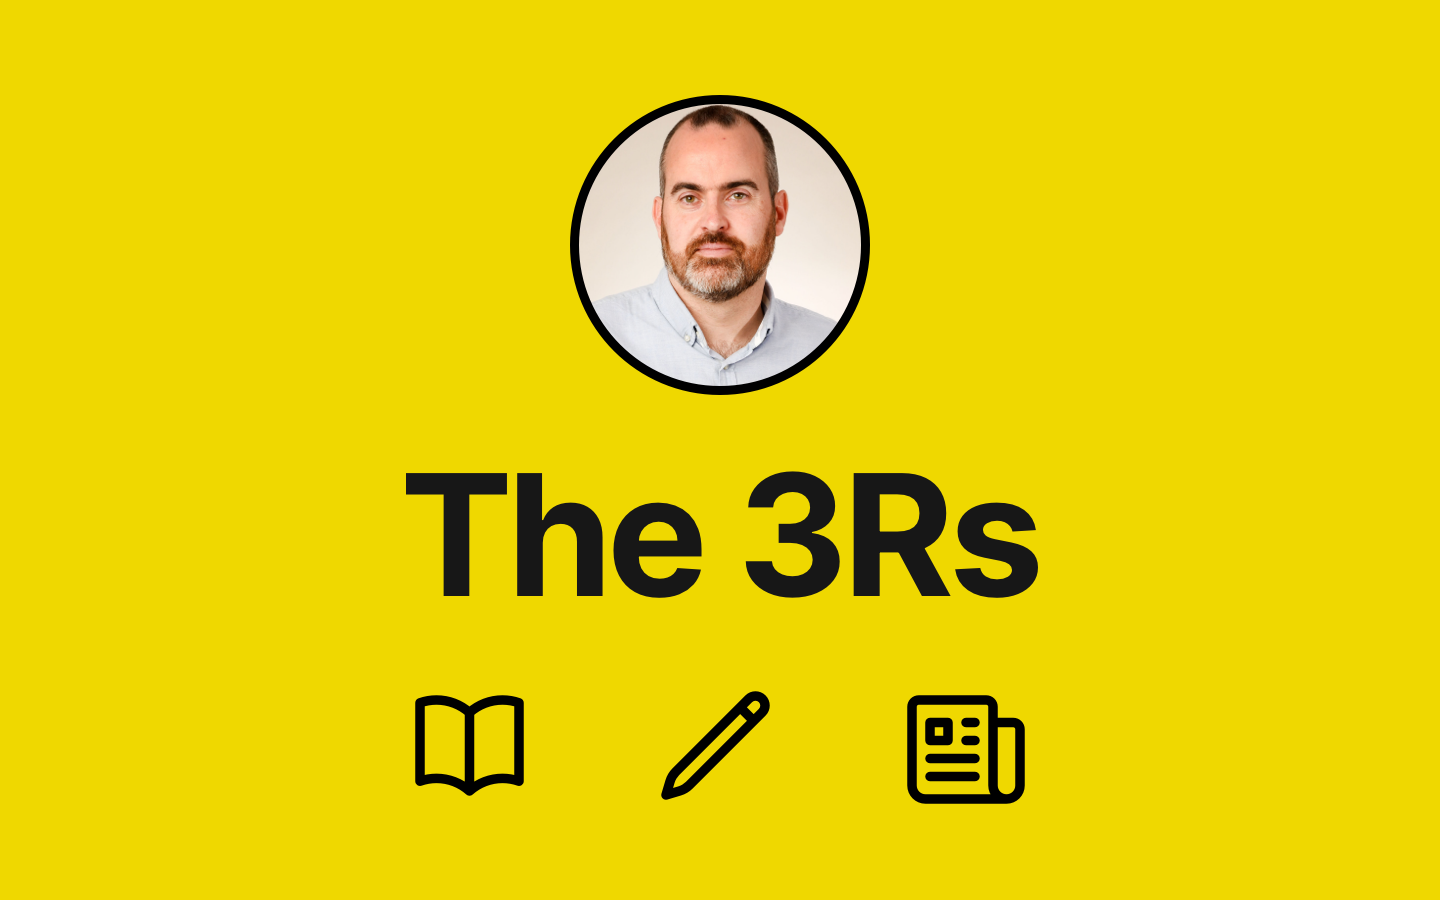 The 3Rs - Reading, w®iting, and research to be interested in #30 feature image